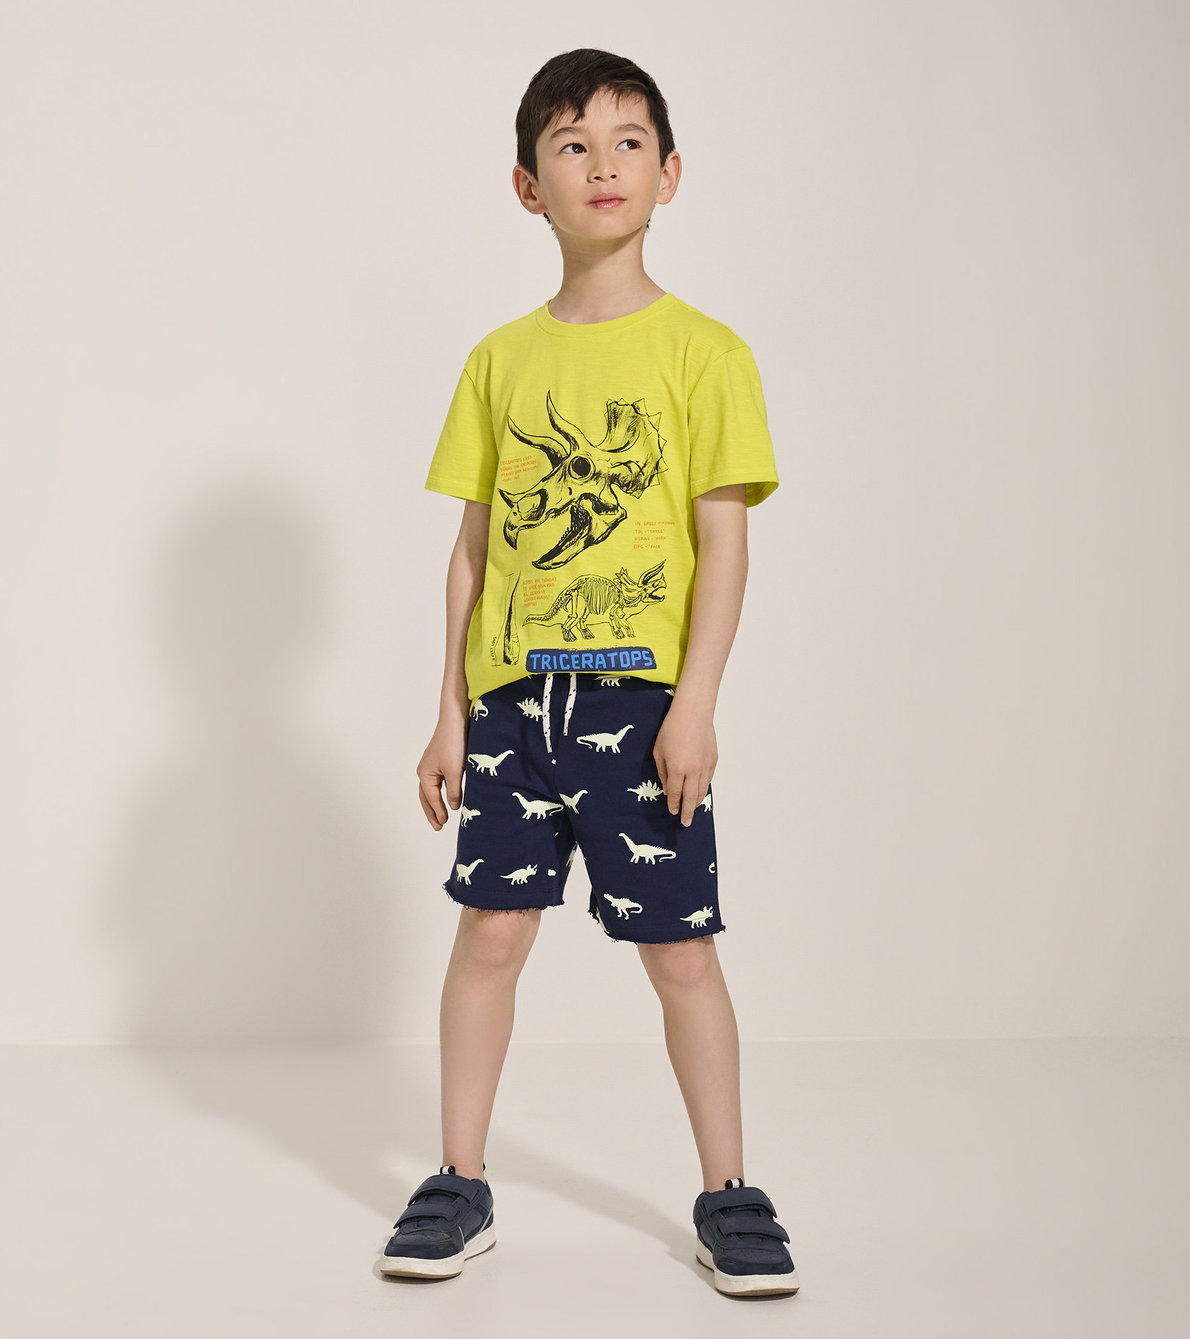 View larger image of Boys Triceratops Graphic Tee